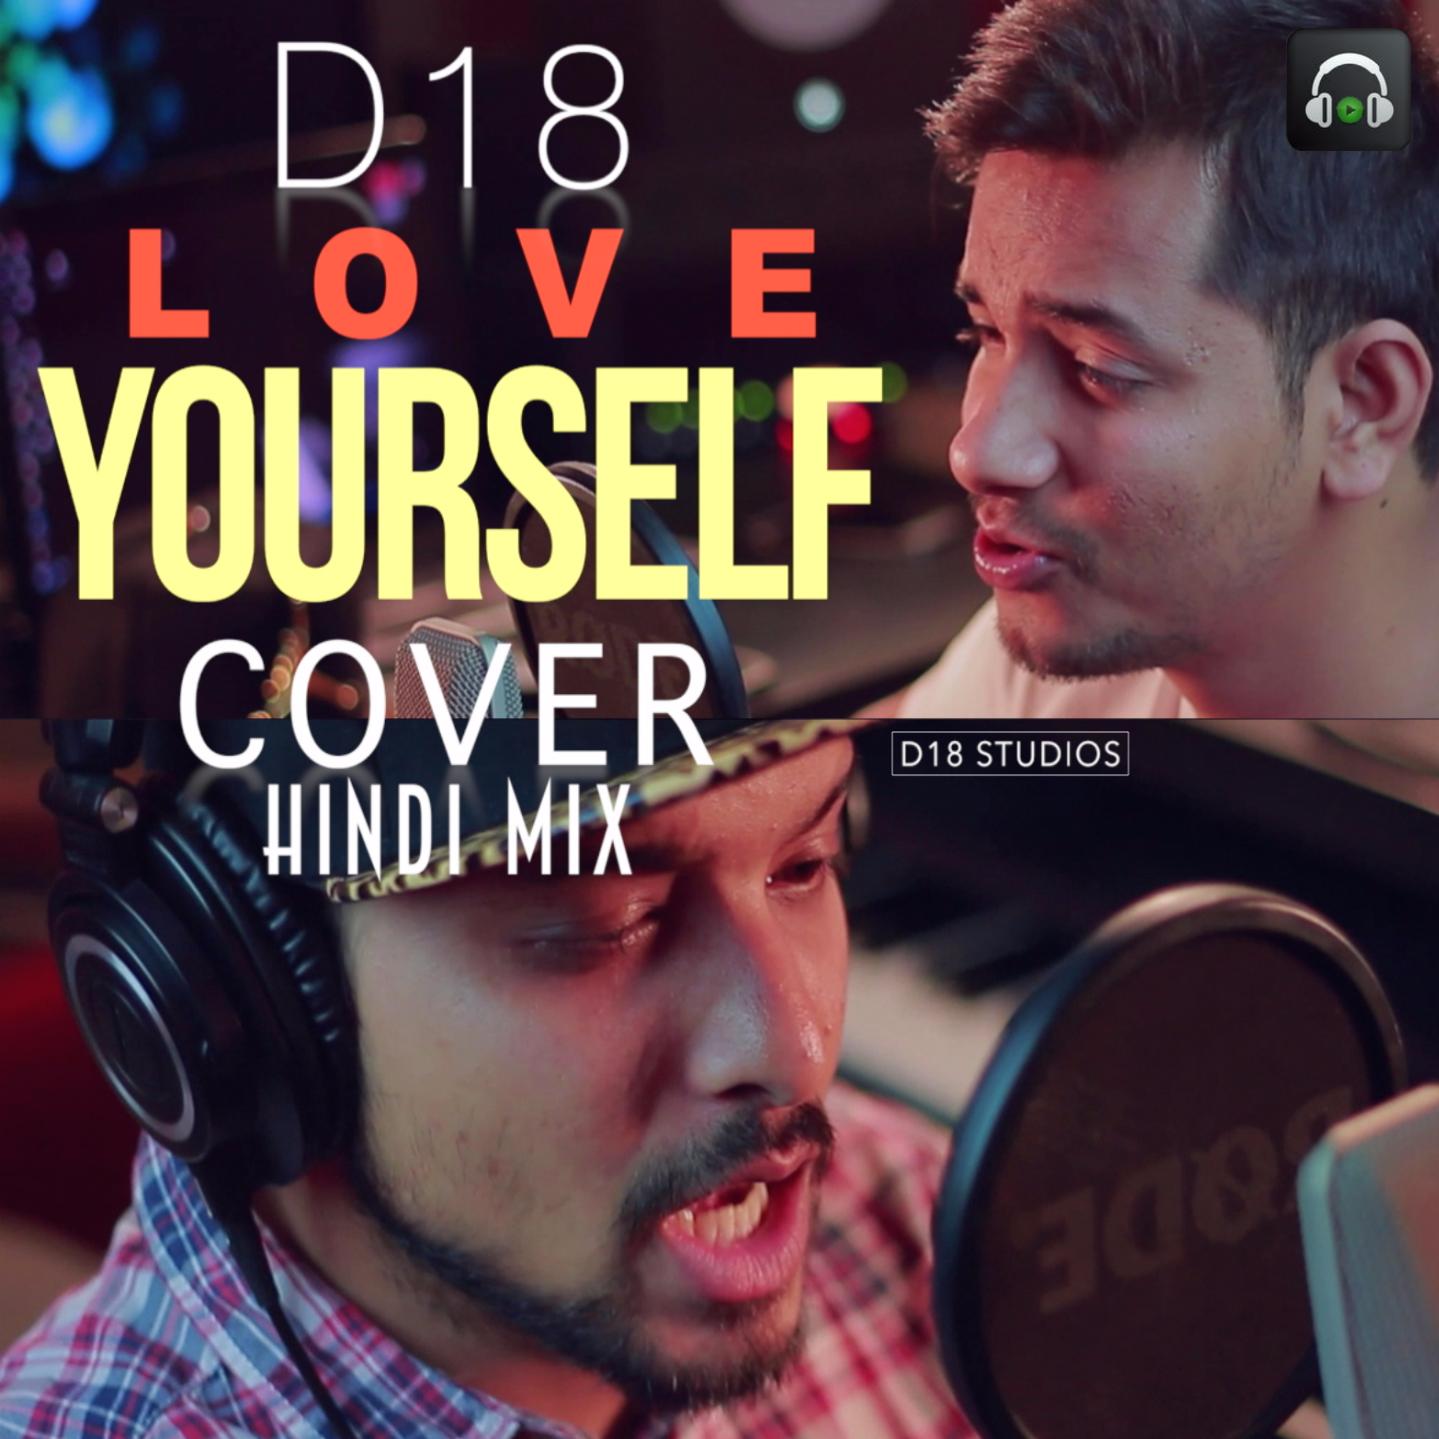 Love Yourself (Cover) - Hindi Mix by D18